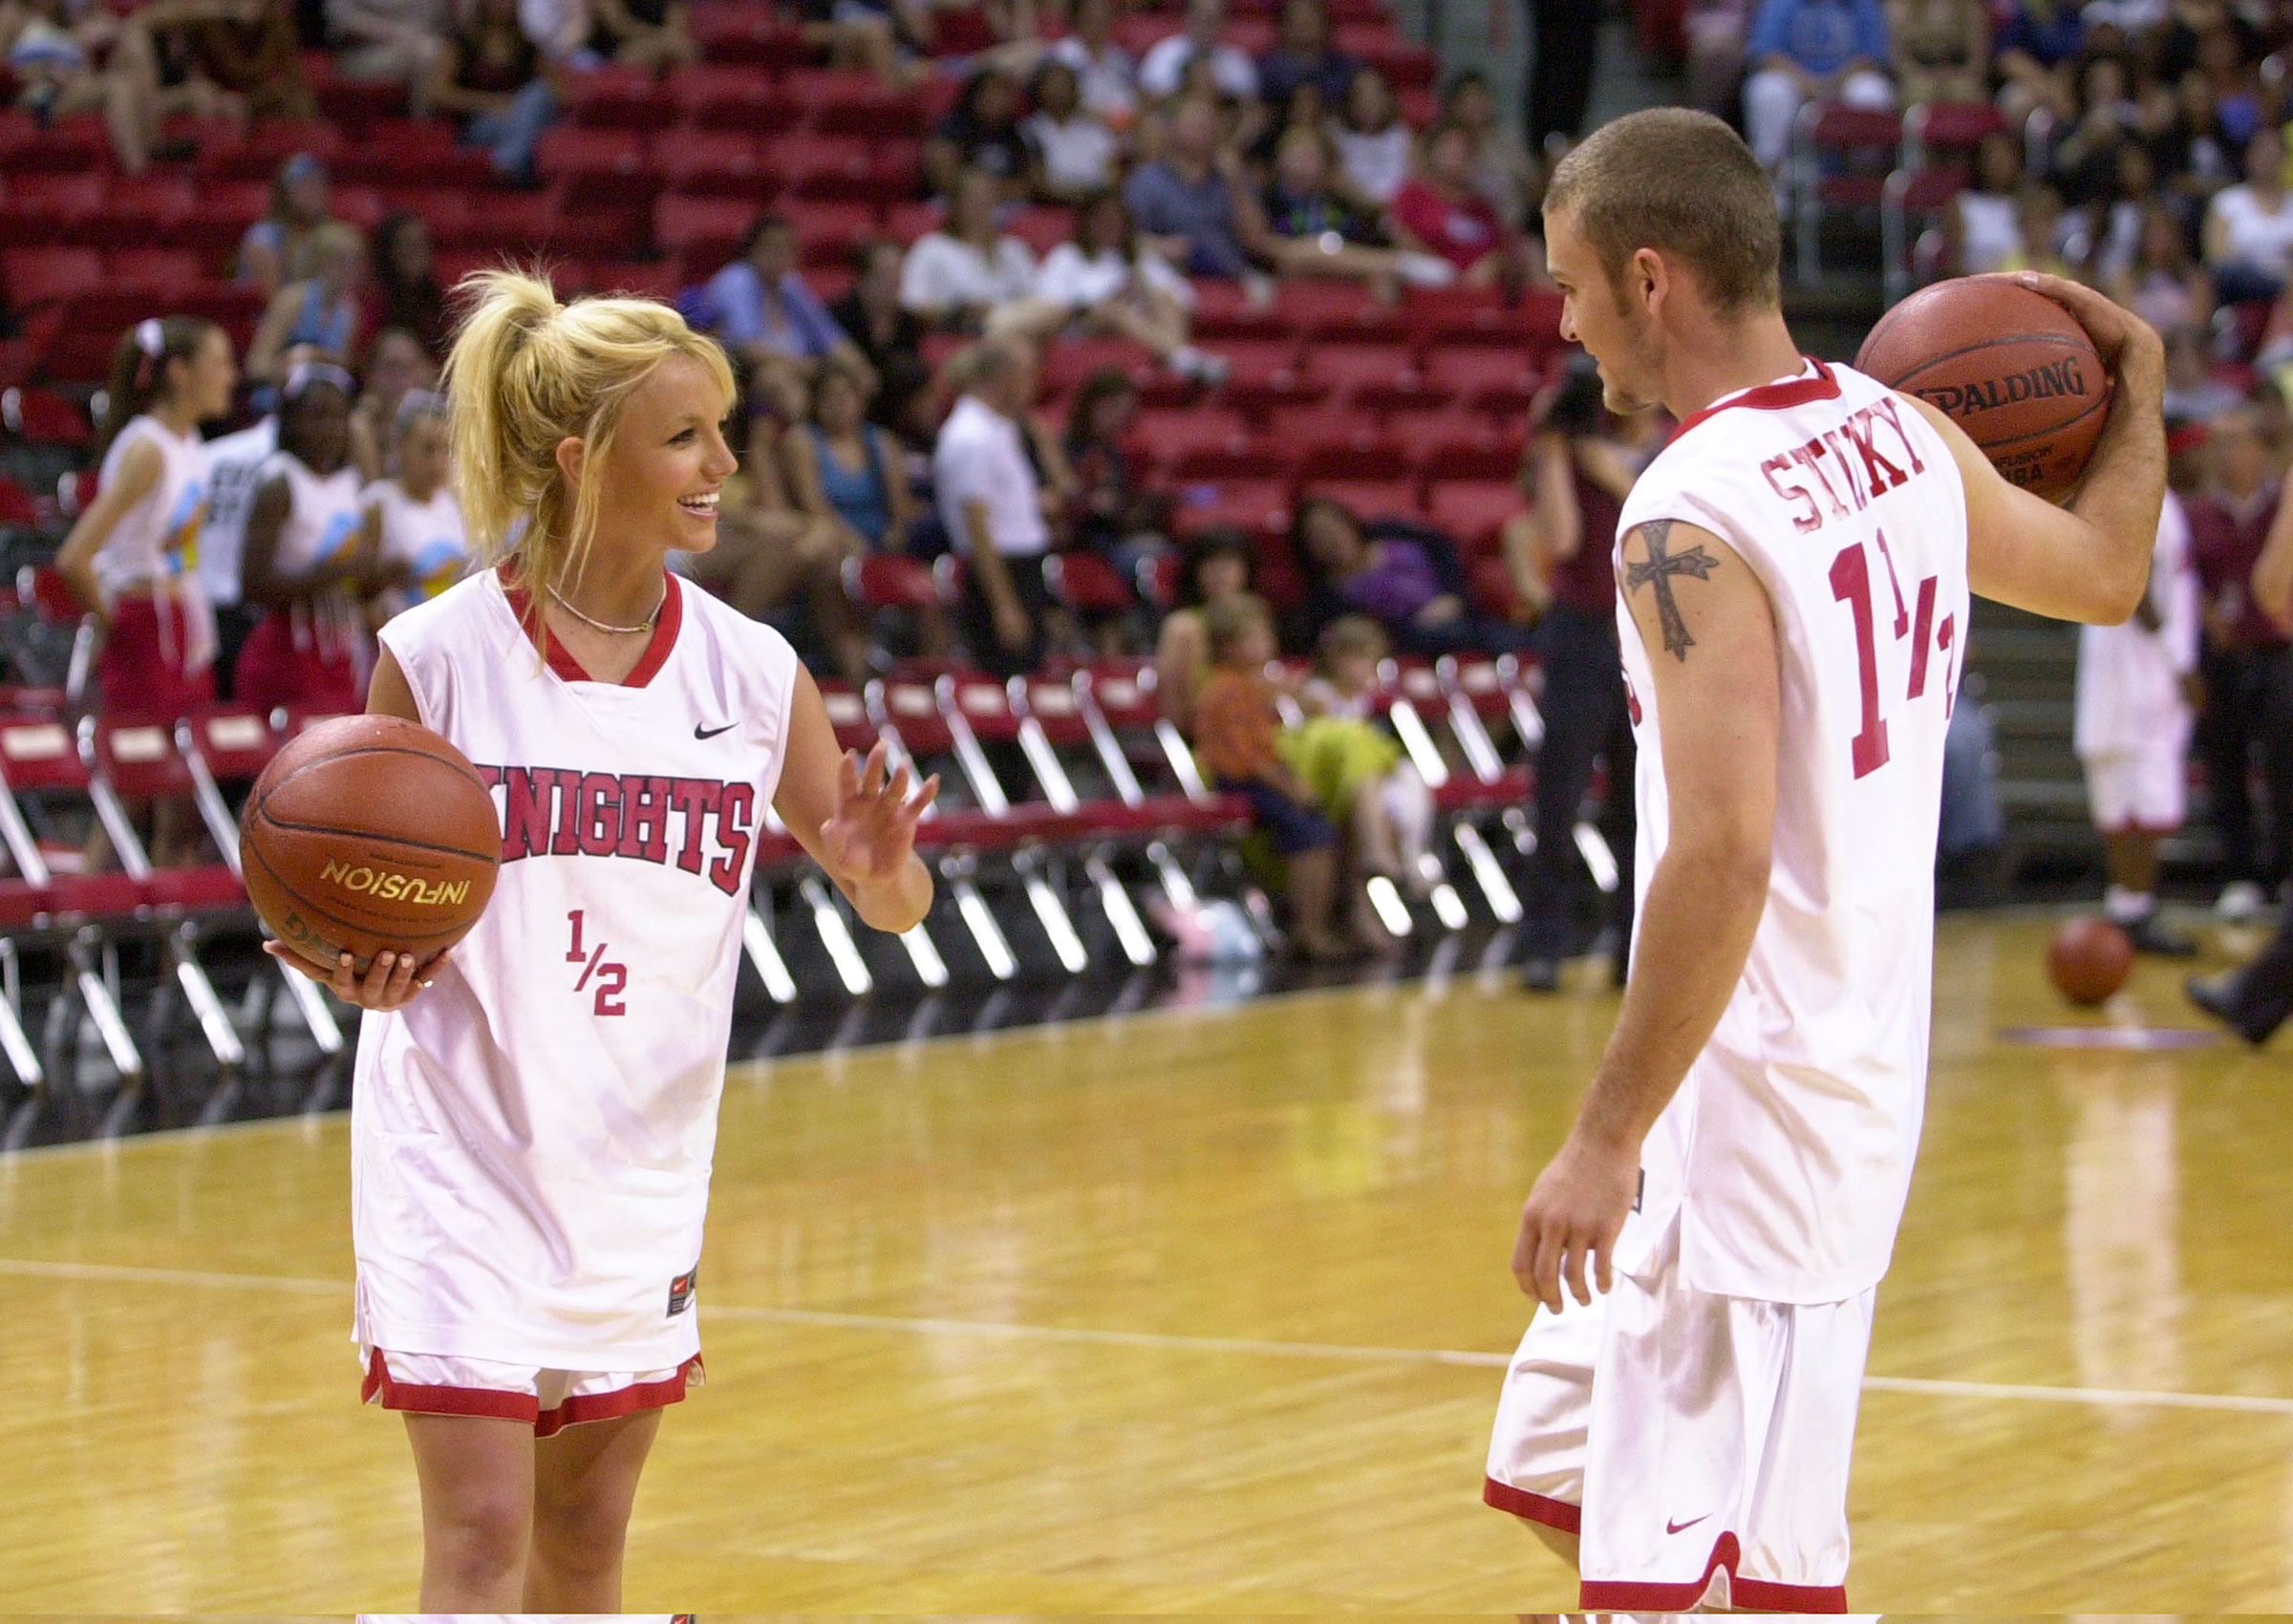 Spears and Timberlake at a basketball charity event in 2001.